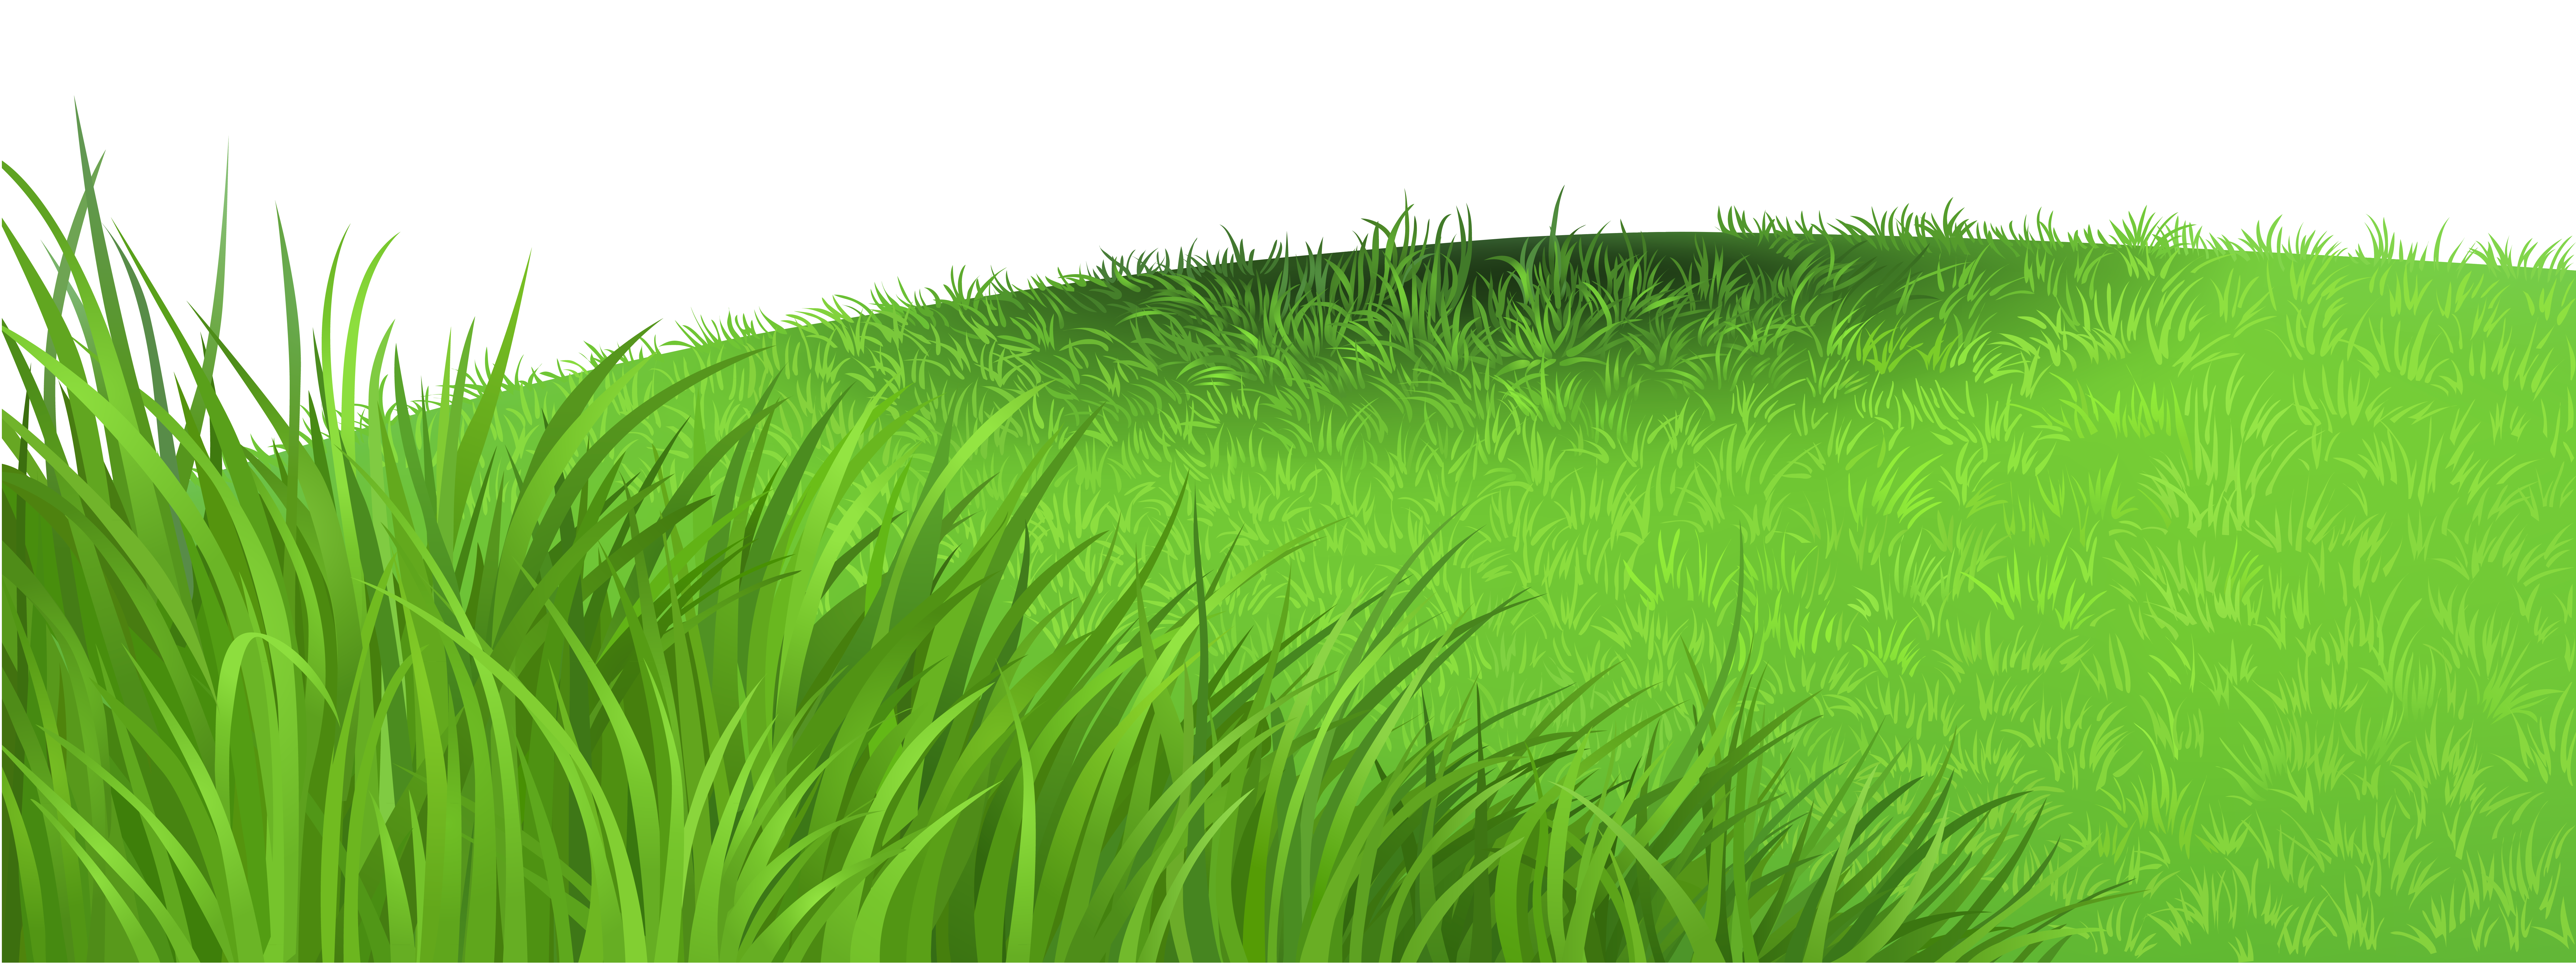 png clipart grass - photo #19